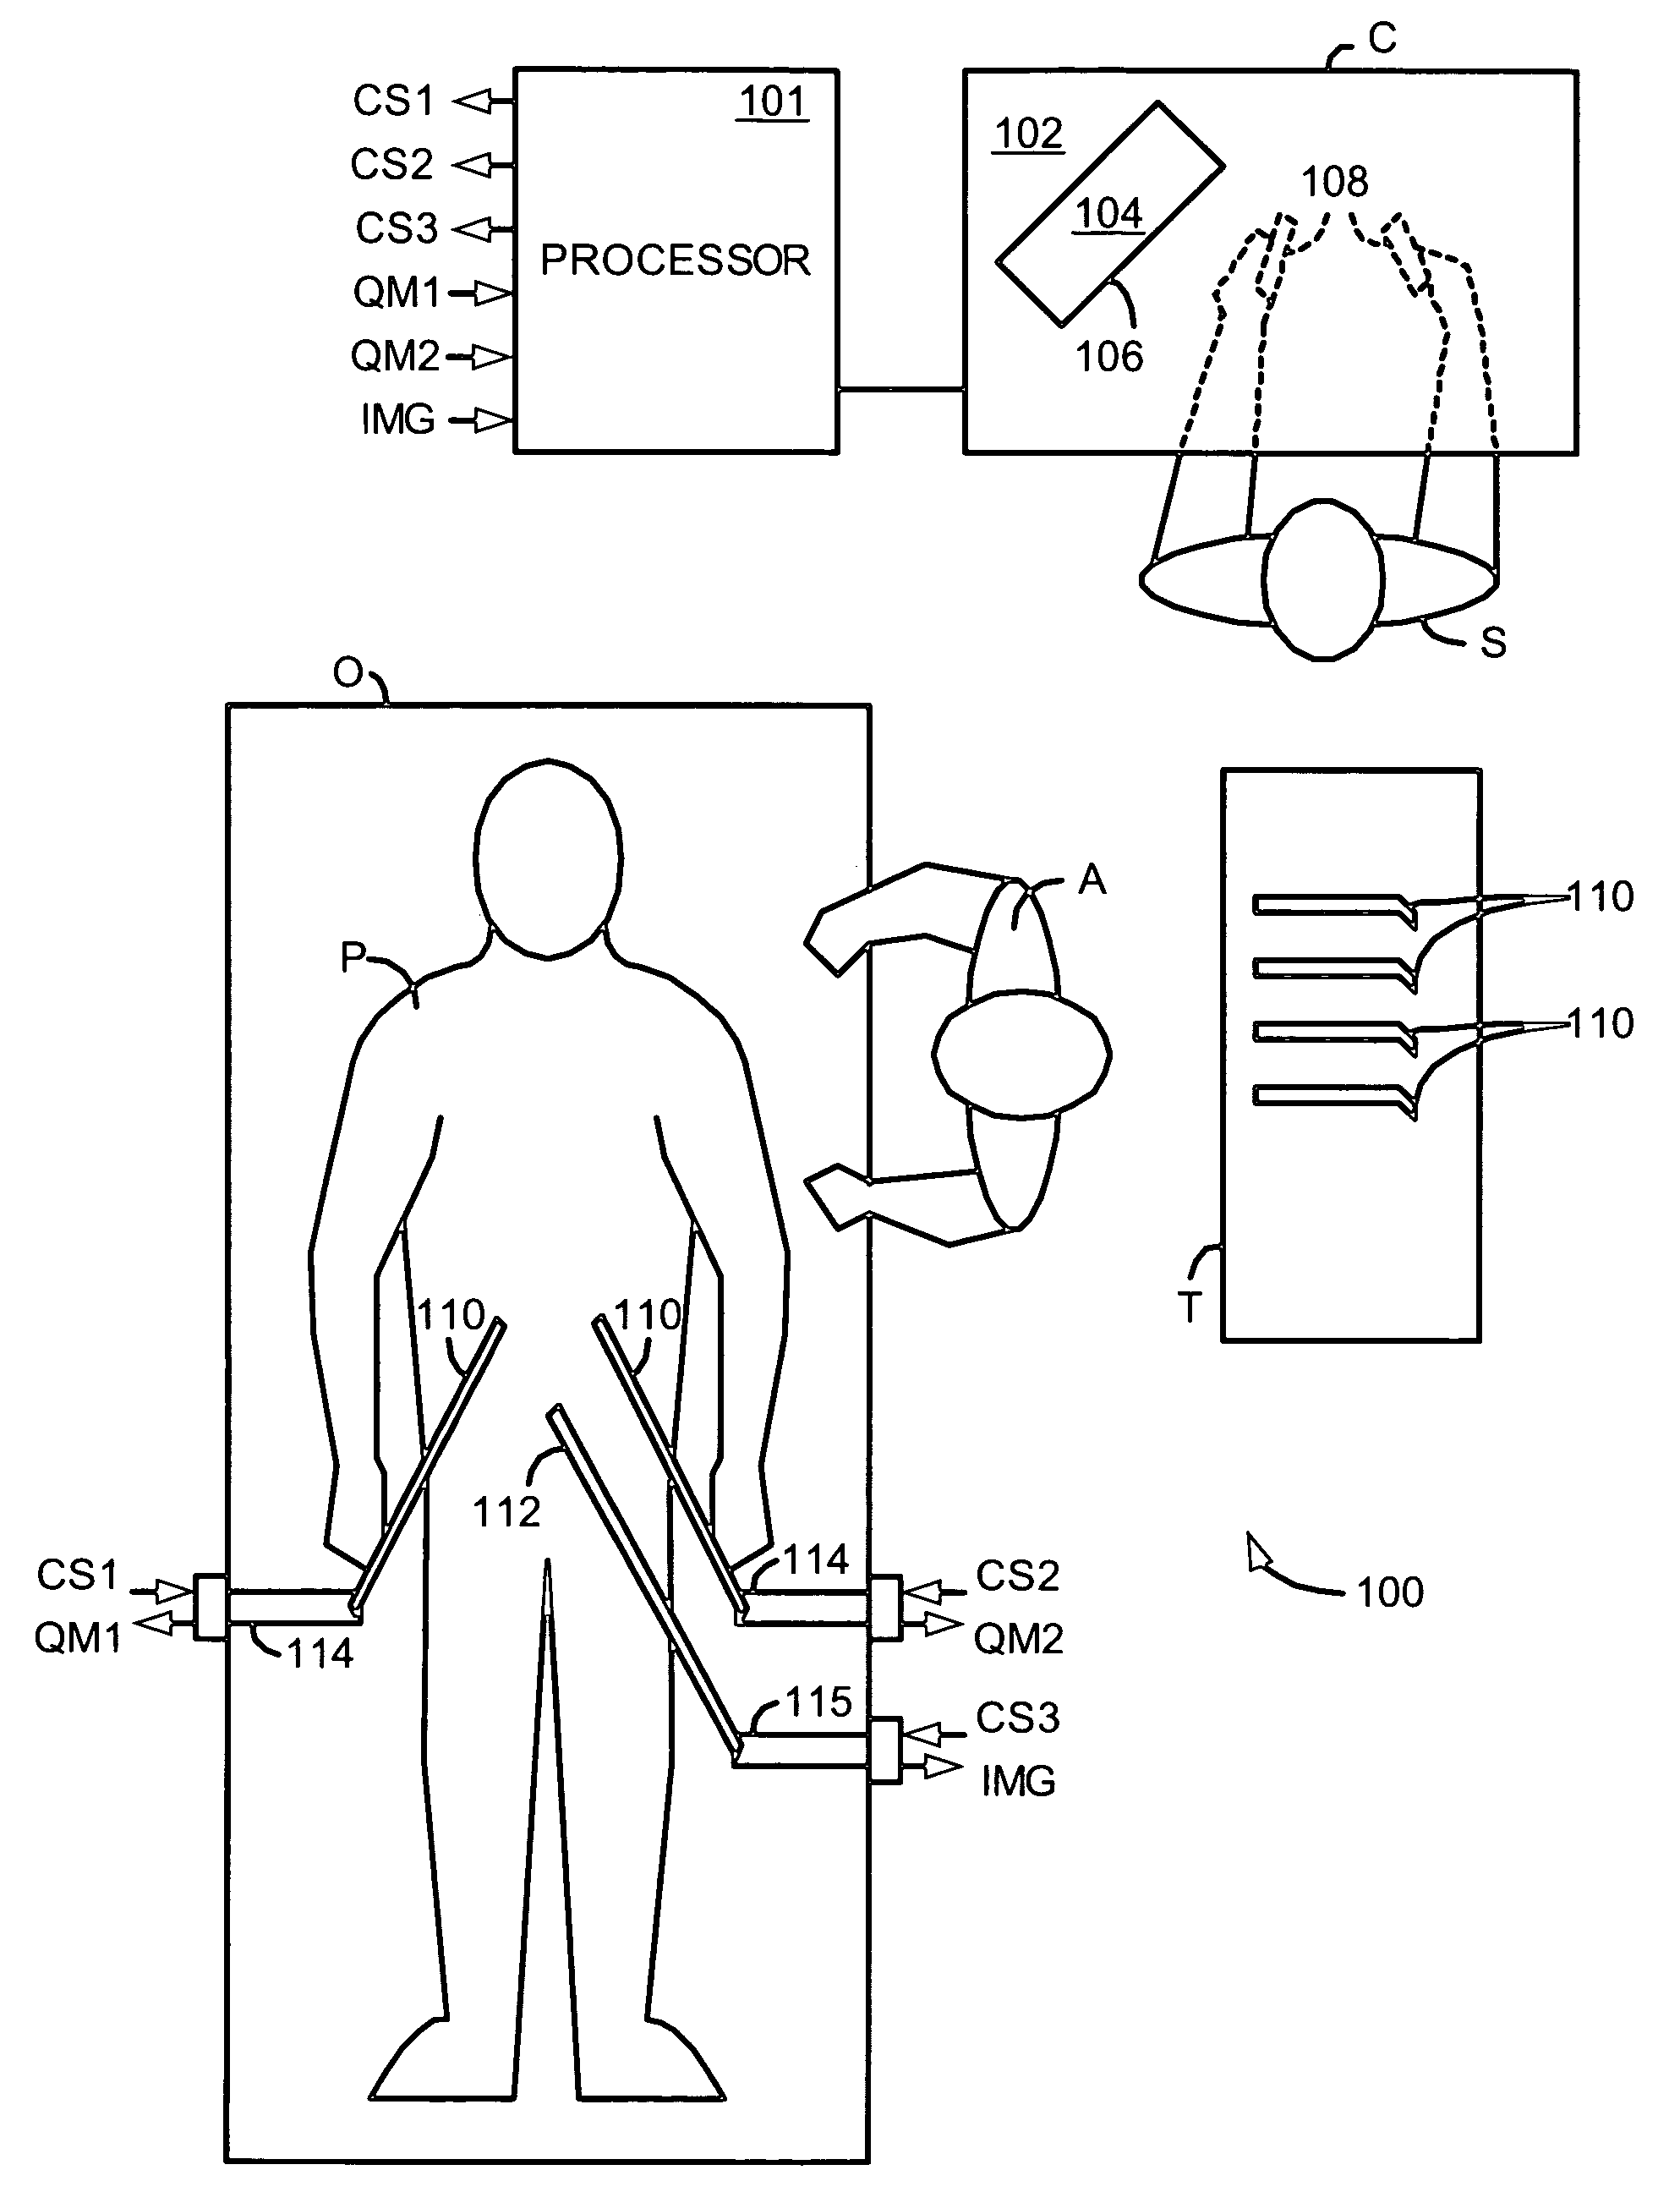 Non-force reflecting method for providing tool force information to a user of a telesurgical system